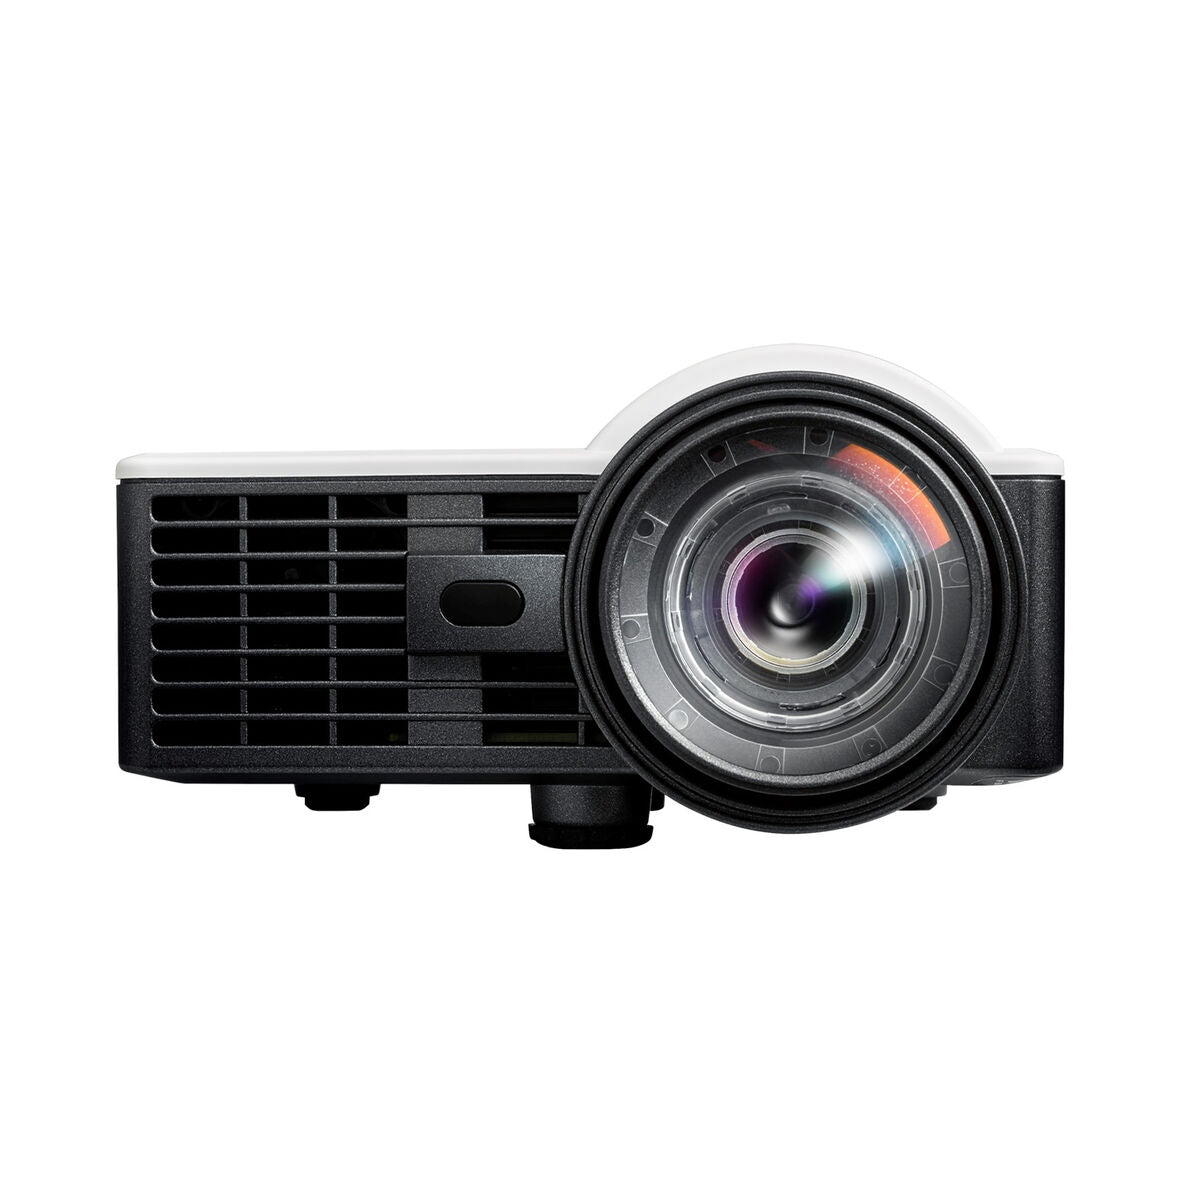 Projector Optoma ML1050ST WXGA 1000 Lm, Optoma, Electronics, TV, Video and home cinema, projector-optoma-ml1050st-wxga-1000-lm, Brand_Optoma, category-reference-2609, category-reference-2642, category-reference-2947, category-reference-t-18805, category-reference-t-19653, cinema and television, computers / peripherals, Condition_NEW, entertainment, office, Price_700 - 800, RiotNook